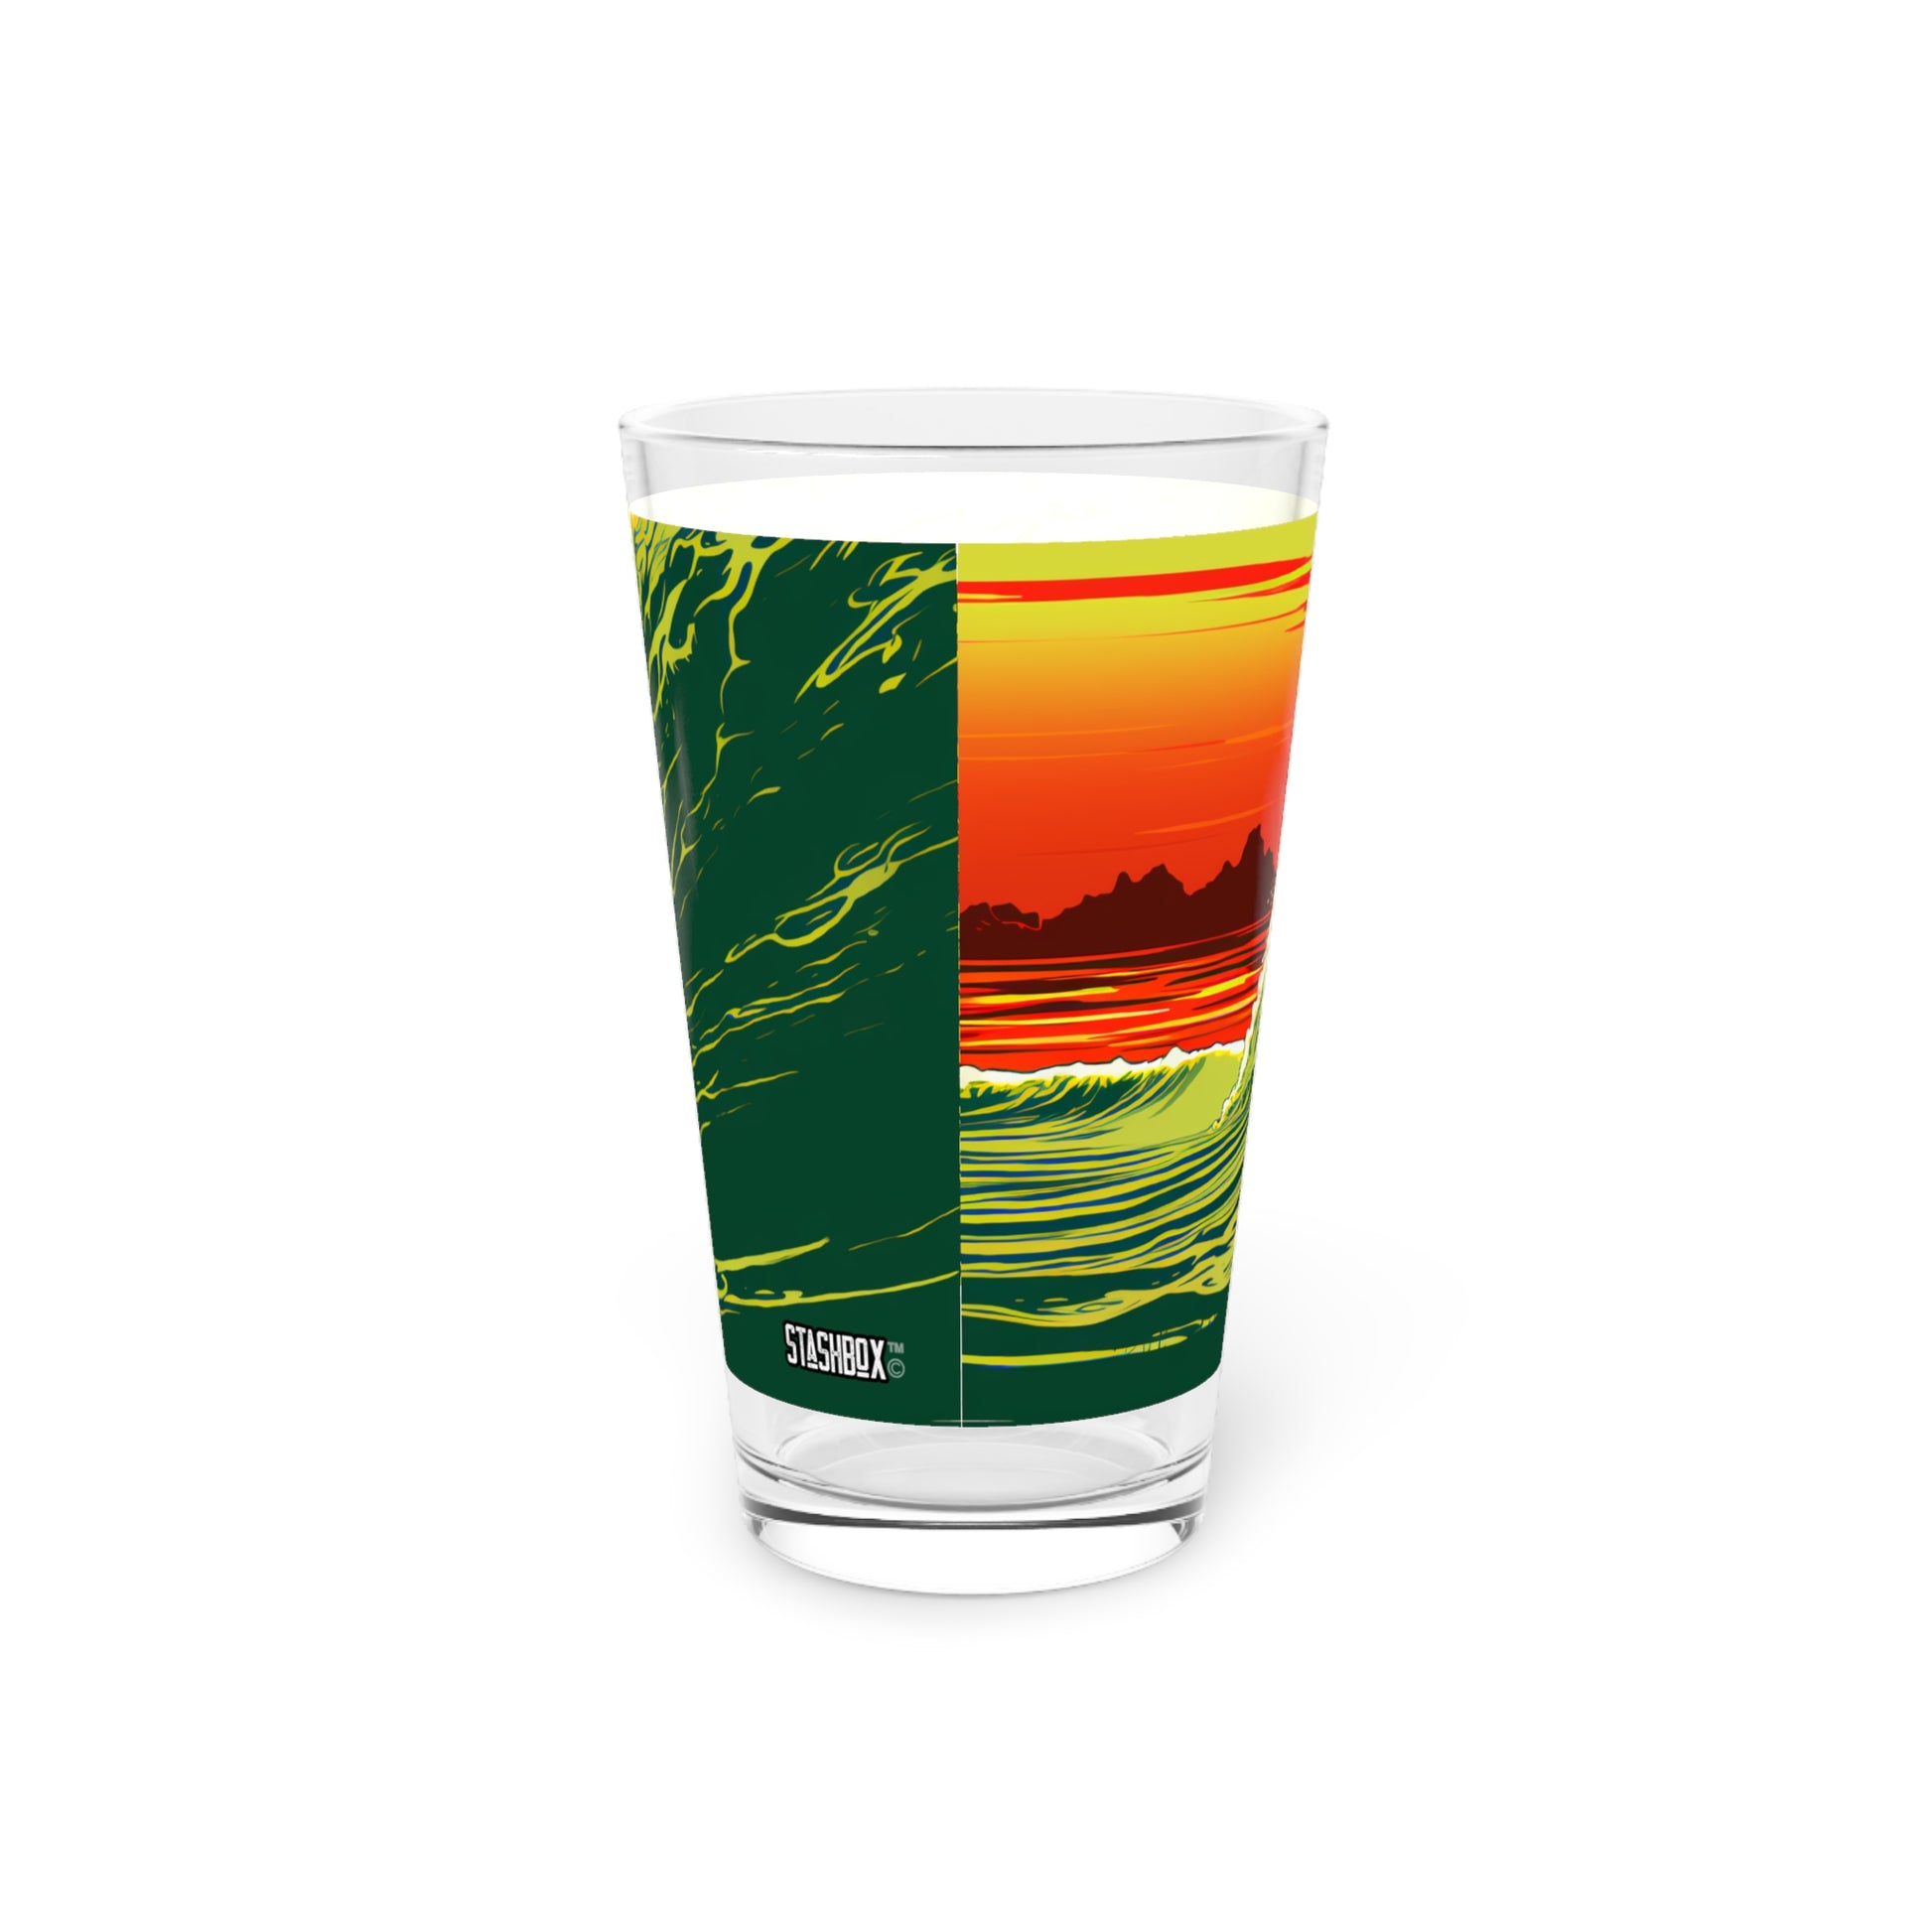 Surfing in Hawaii Wave Art Pint Glass 16oz - Waves Design #040: Experience the spirit of Hawaii's waves with our vibrant and stylish pint glass.